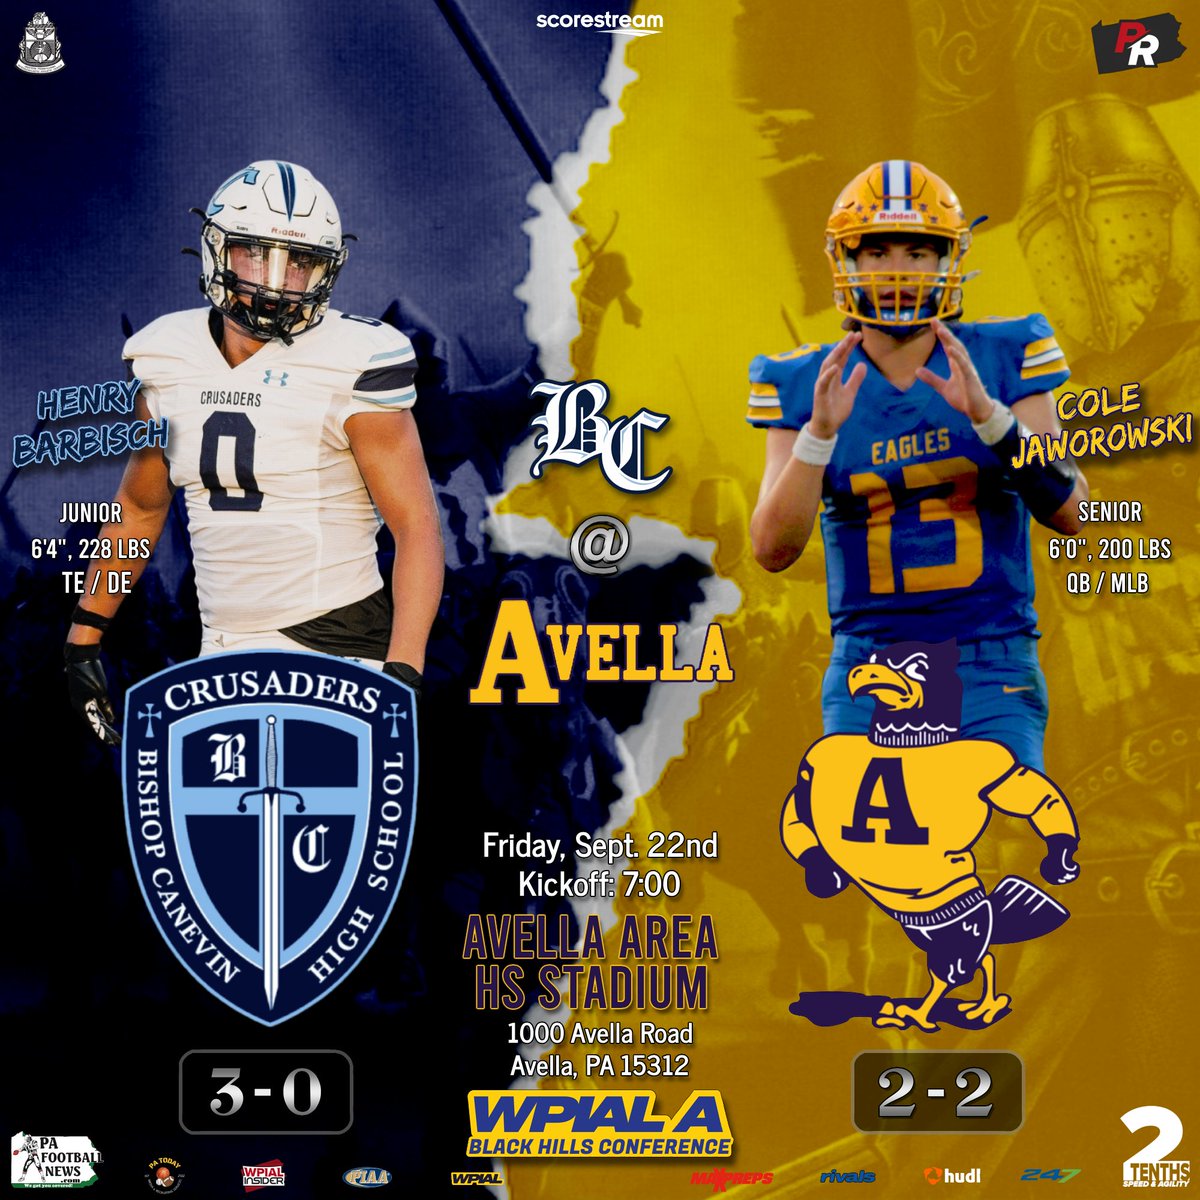 ⚔️Week 4⚔️

The @CrusadersFBall (3-0) take on the Avella Eagles (2-2) at 7pm at Avella Area HS Stadium in this Black Hills Conference matchup! #LetsGoBC

🆚Avella 
📆Friday, Sept. 22nd
⏰ 7:00 PM
📍Avella Area HS Stadium

#WPIAL, #BrickByBrick, #BeUncommon, #WeAre, #WeekFour